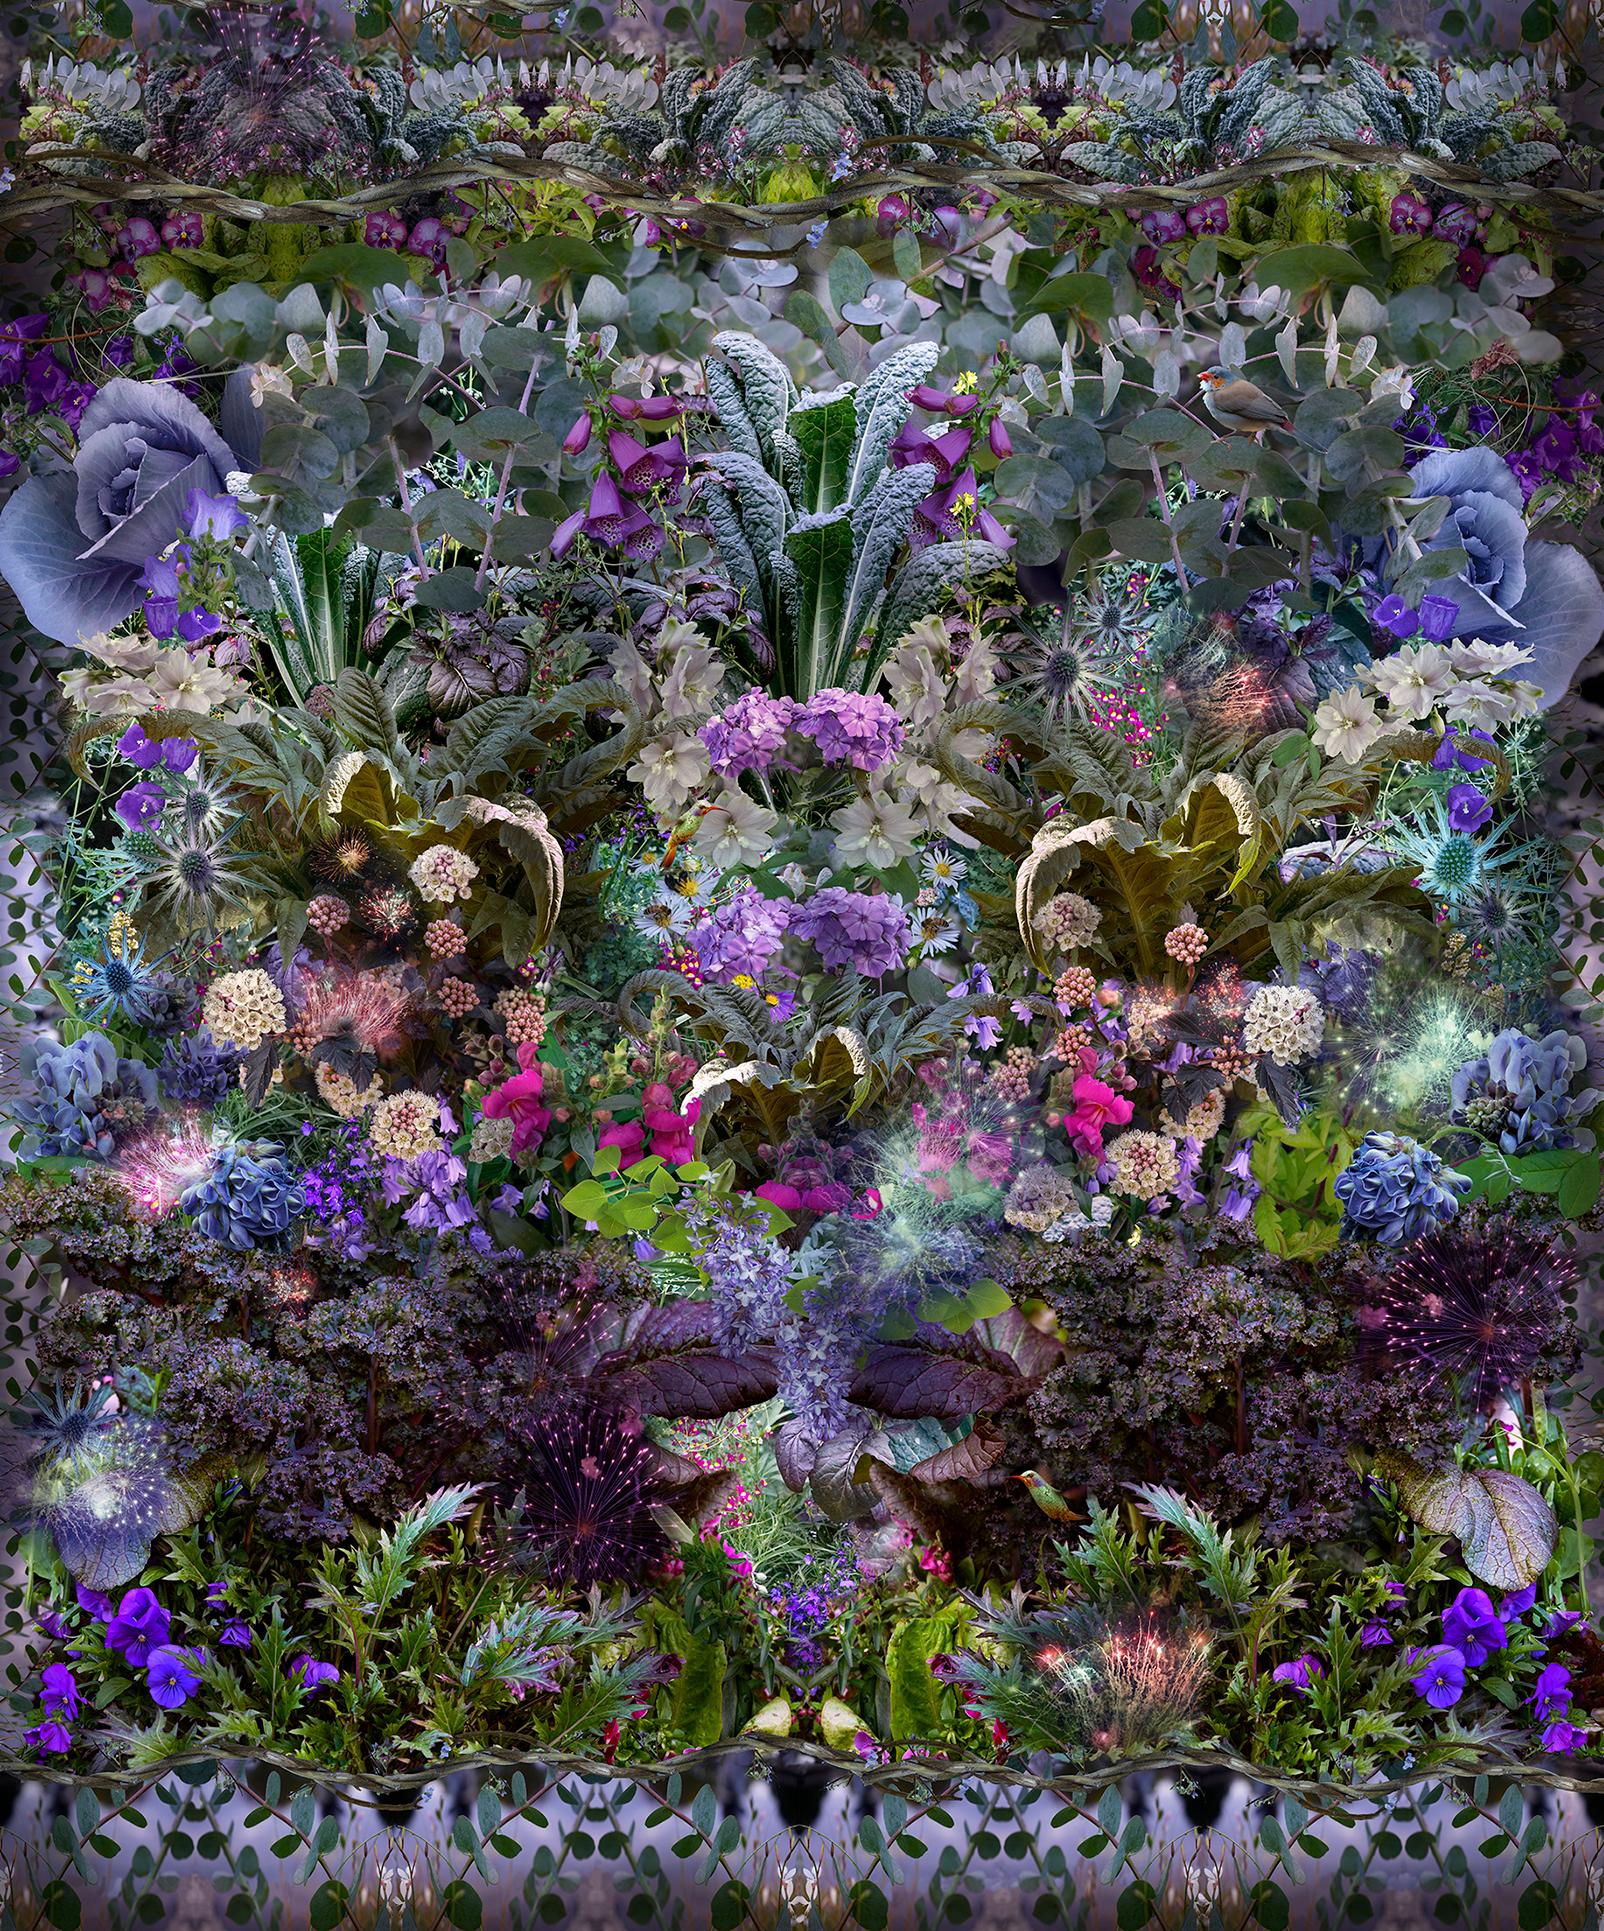 Lisa A. Frank Abstract Photograph - Singing Over Shrubs and Vines..., Photograph of Flowers in Violet, Green, Pink